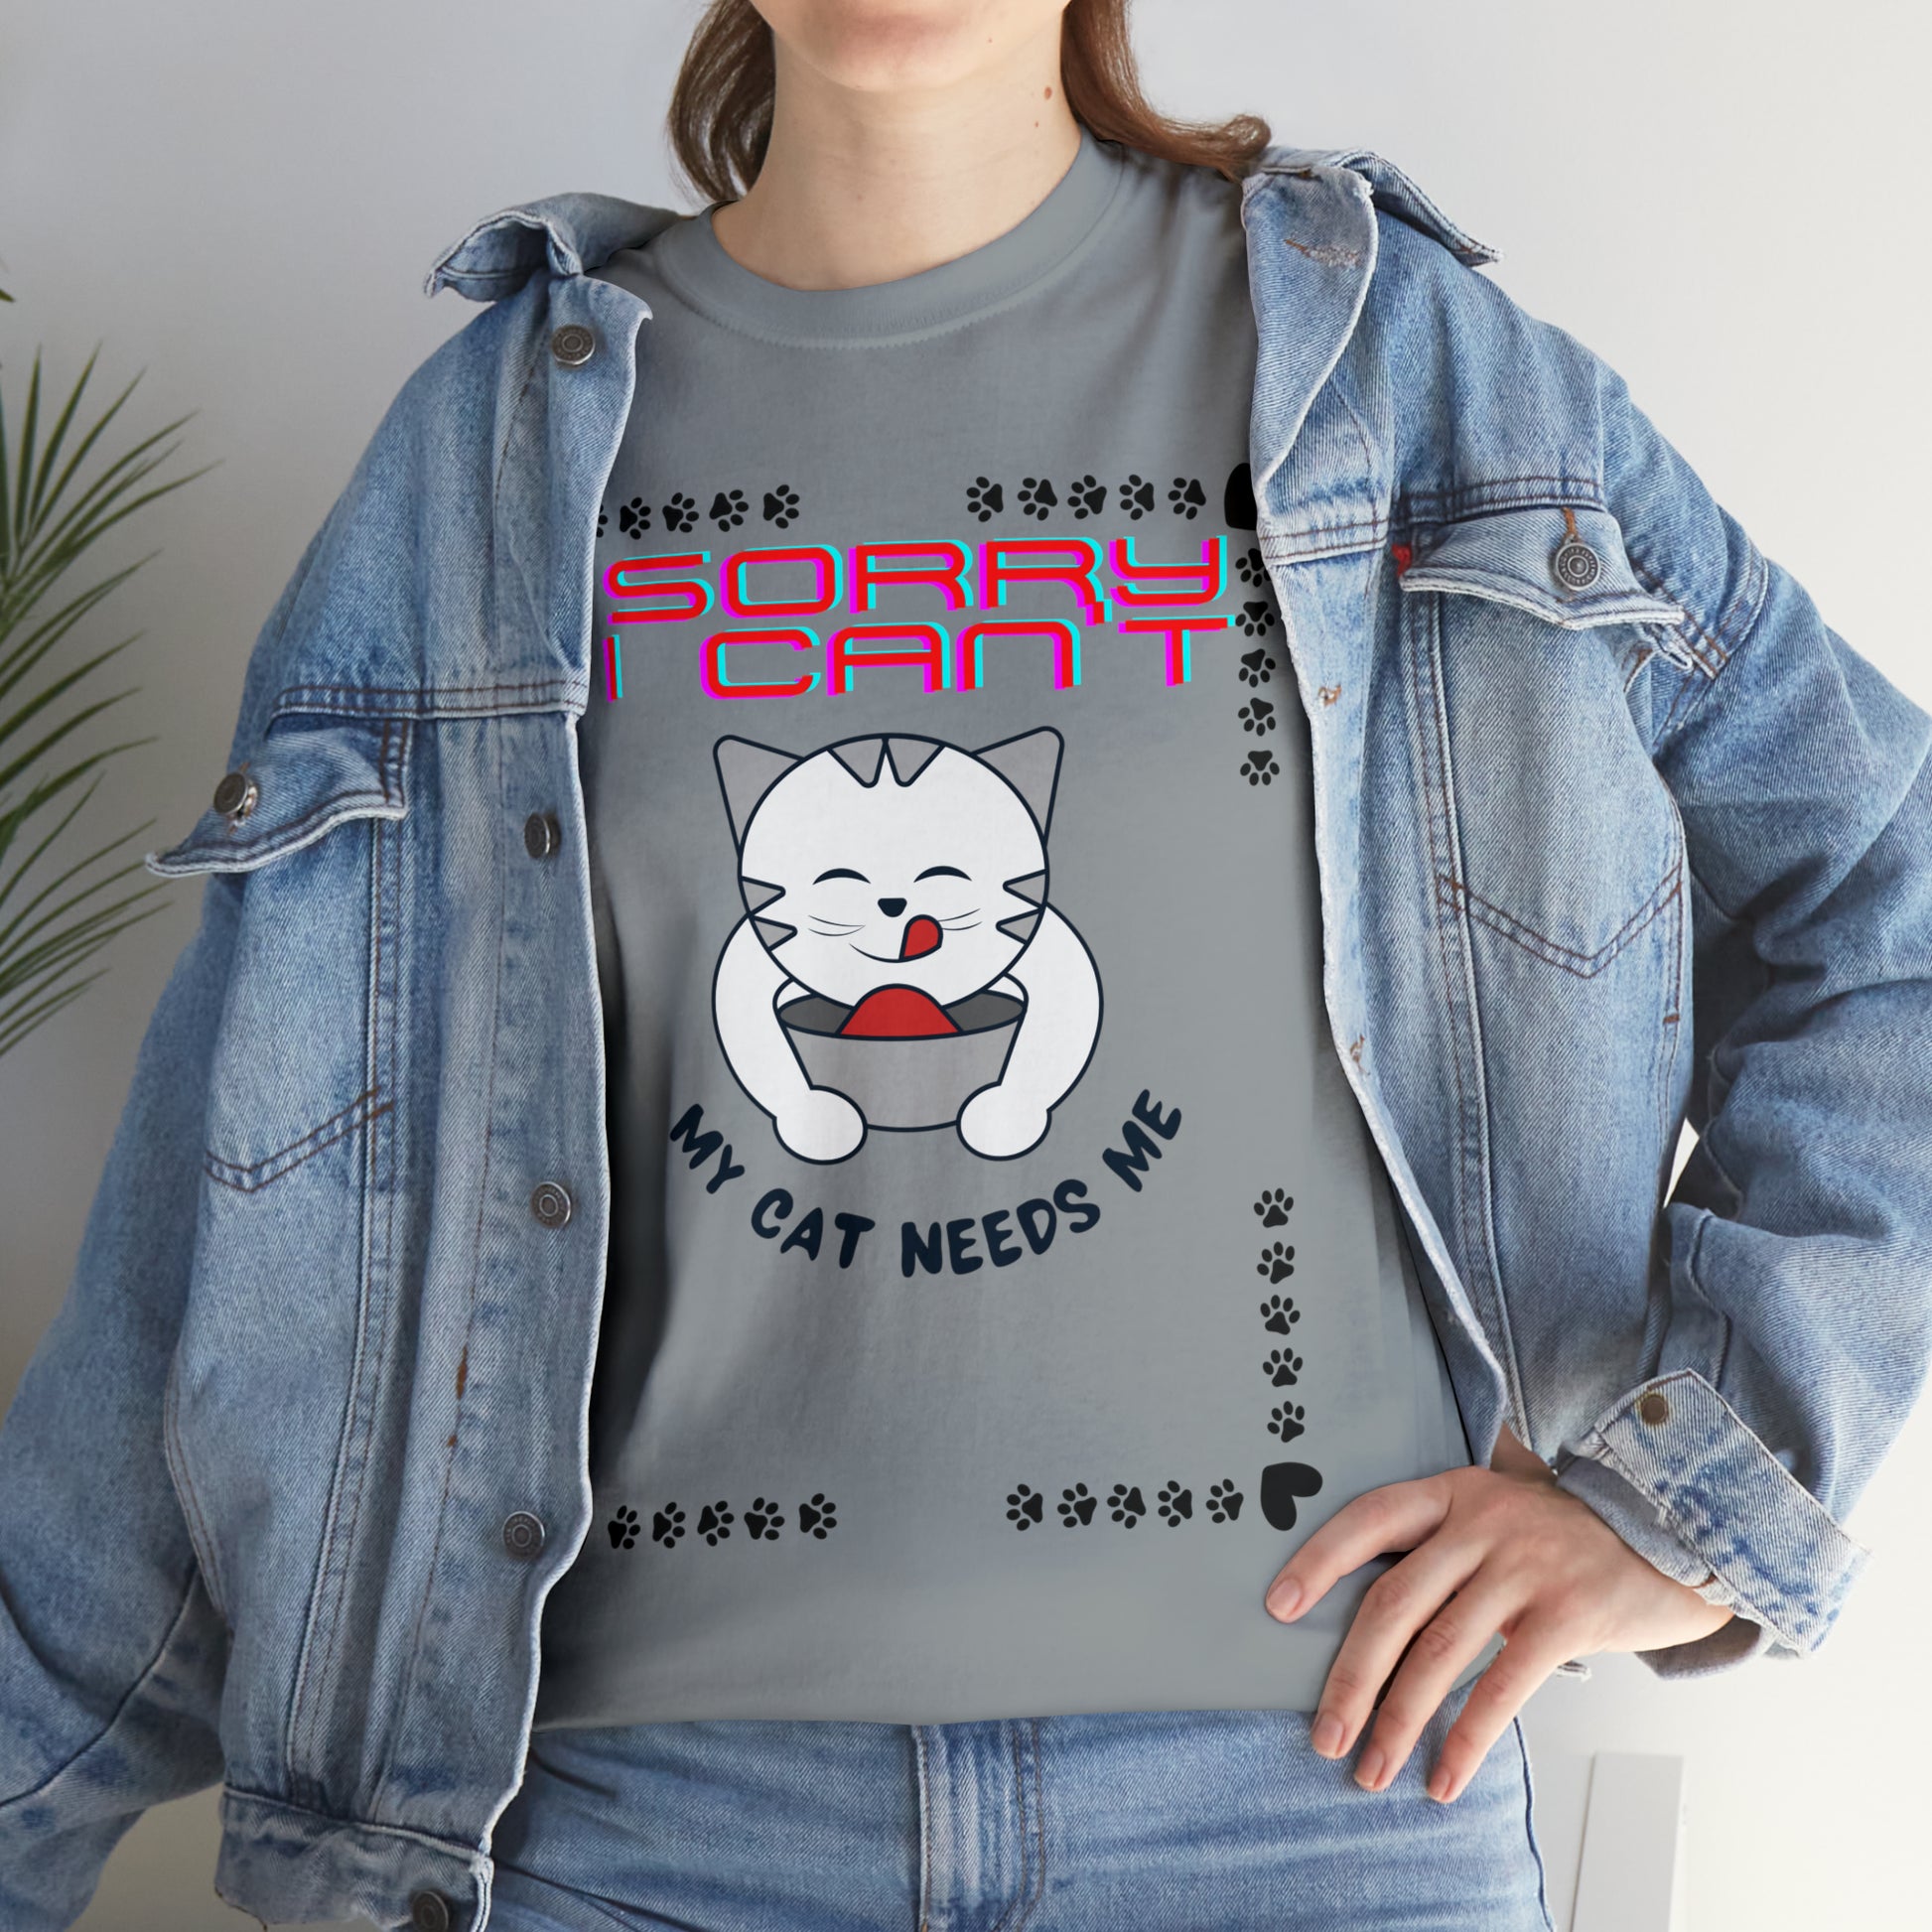 Sorry I Can't My Cat Needs Me T-Shirt | Cat Mom Shirt | Cat Lover Gift | Cat Mom Gift | Animal Lover Gift for Women T-Shirt Gravel S 